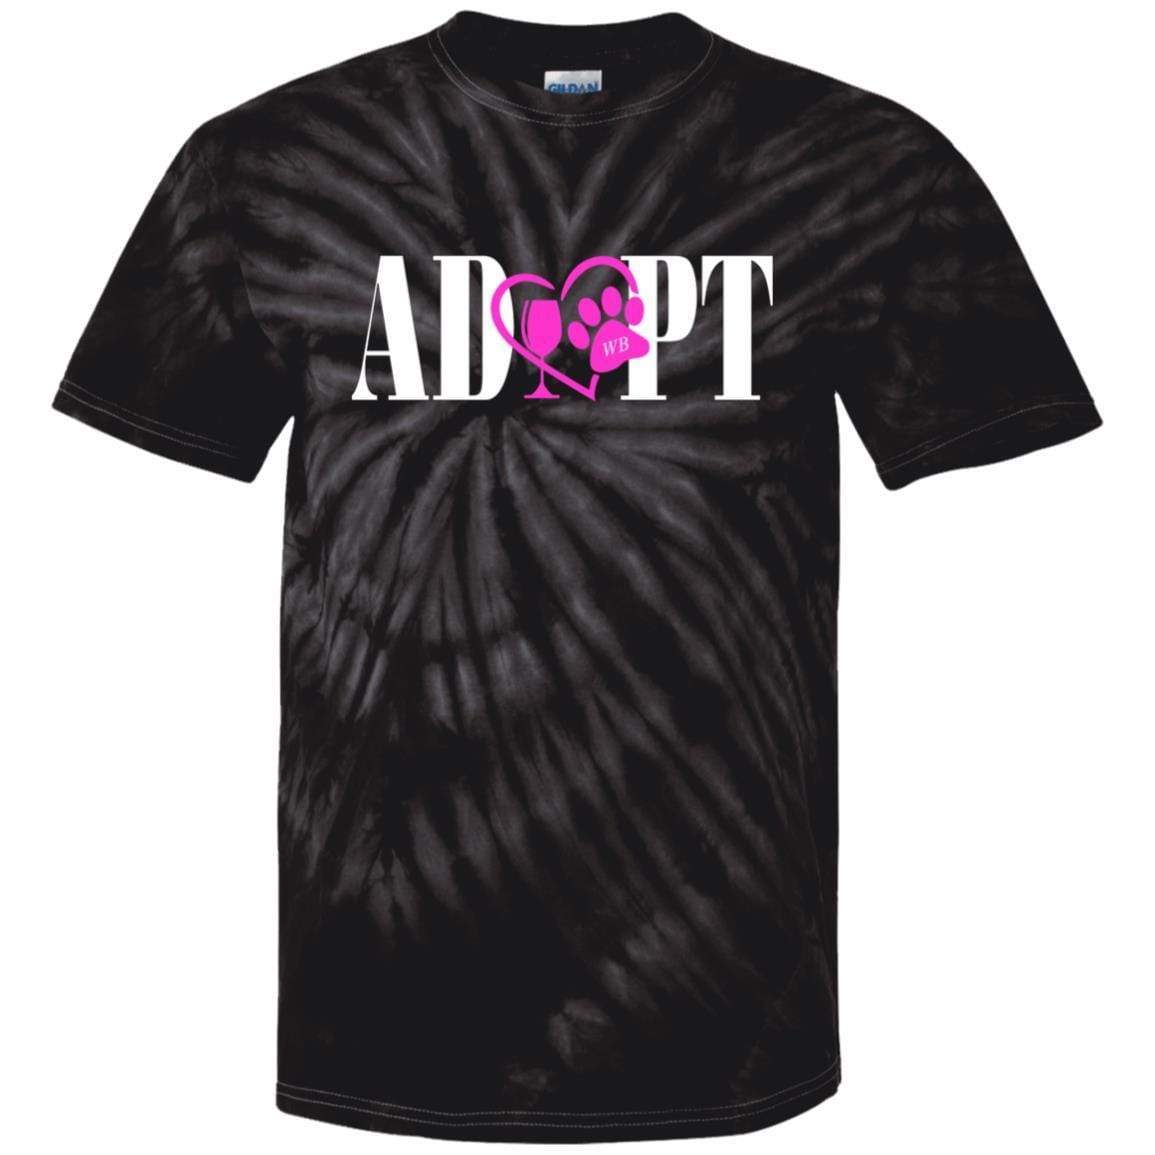 T-Shirts SpiderBlack / S WineyBitches.Co "Adopt" 100% Cotton Tie Dye T-Shirt-Pink Heart-White Lettering WineyBitchesCo